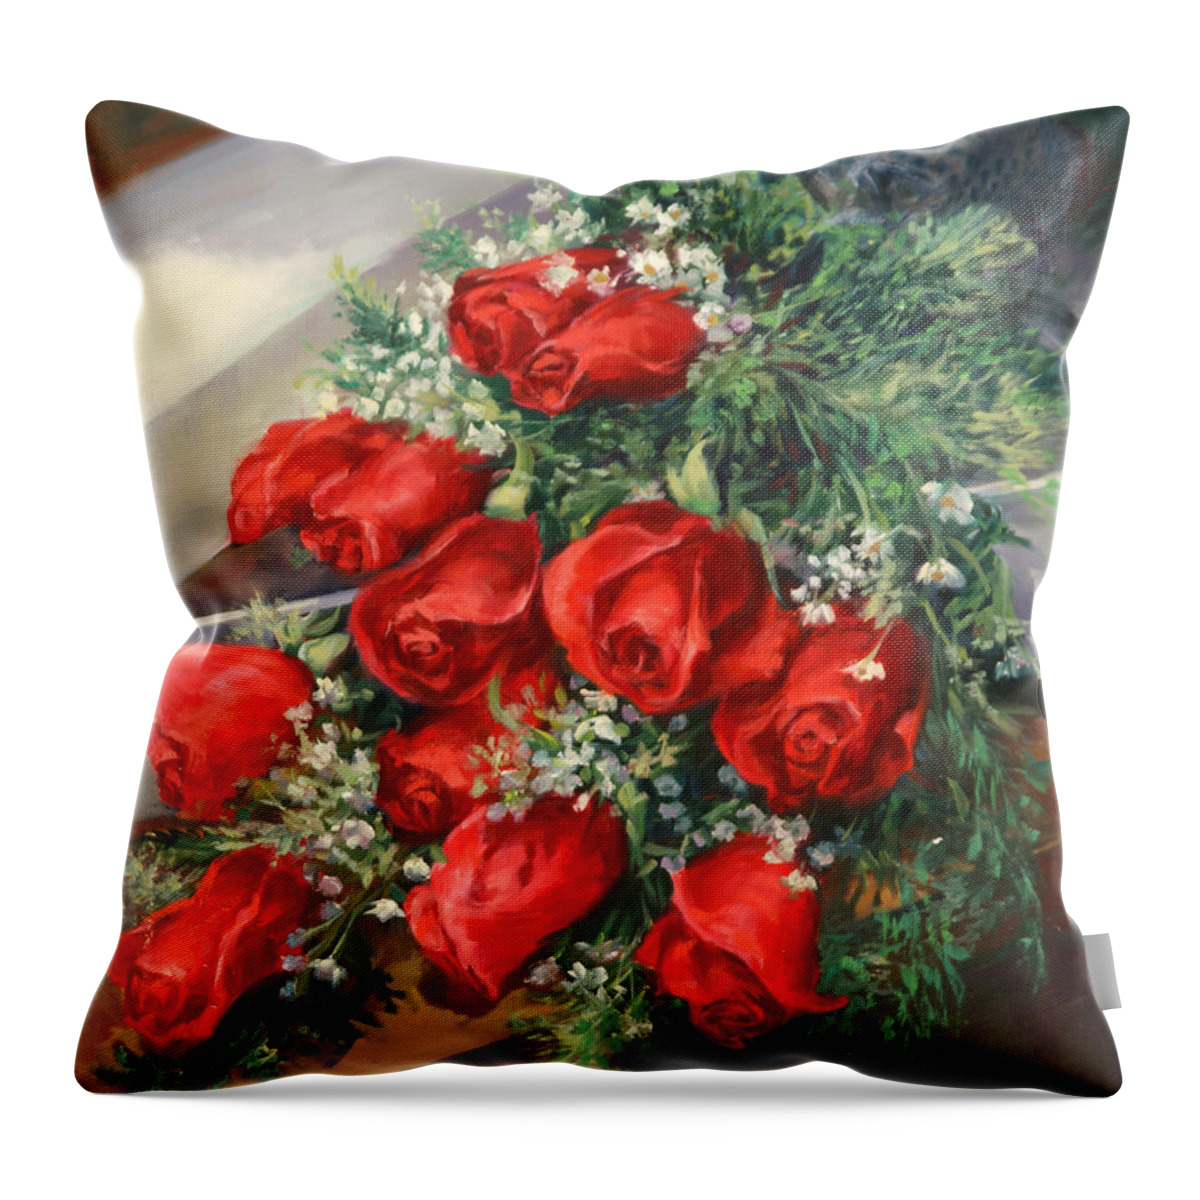 Red Roses Throw Pillow featuring the painting Christmas Red Roses by Laurie Snow Hein